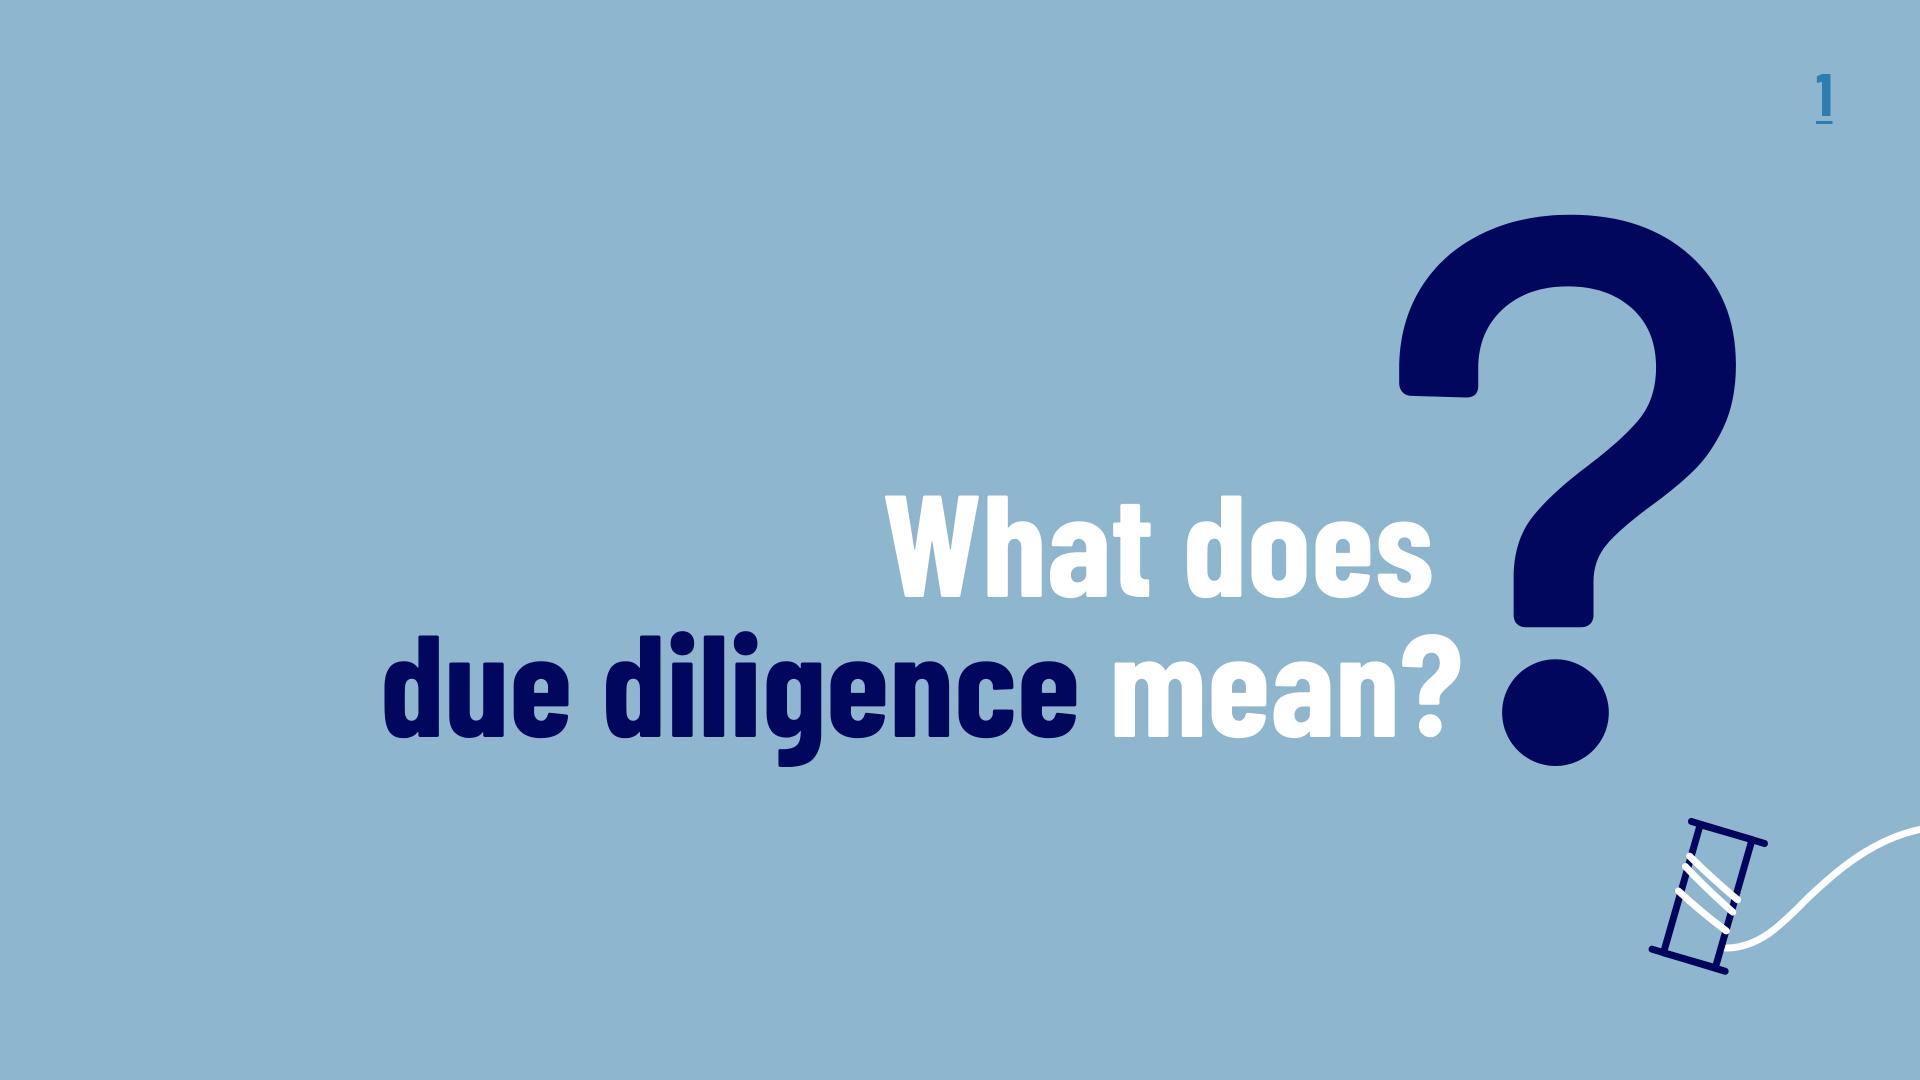 What does due diligence mean?